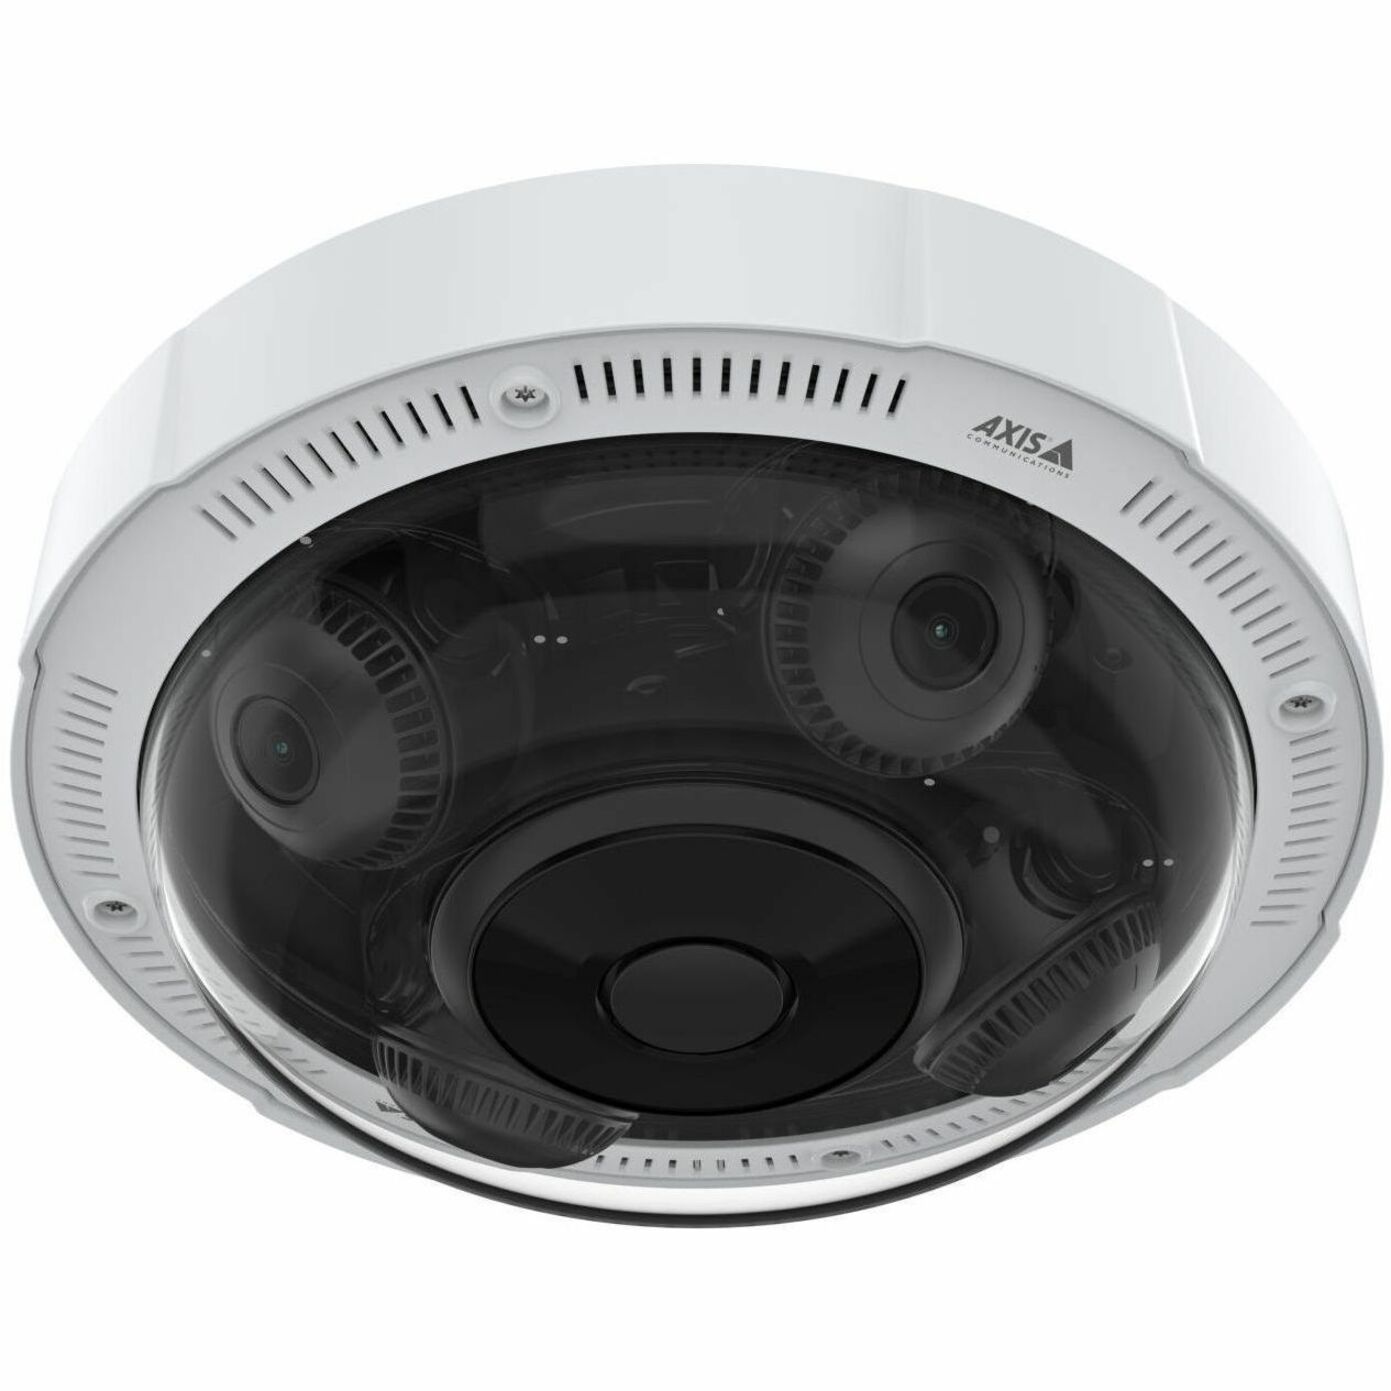 AXIS 02635-001 P3738-PLE Panoramic Camera 4x 4K Multidirectional With Deep Learning, Varifocal Lens, 2.5x Optical Zoom, Memory Card/Cloud Storage, Outdoor, IK09 Impact Protection, IP66/IP67 Ingress Protection